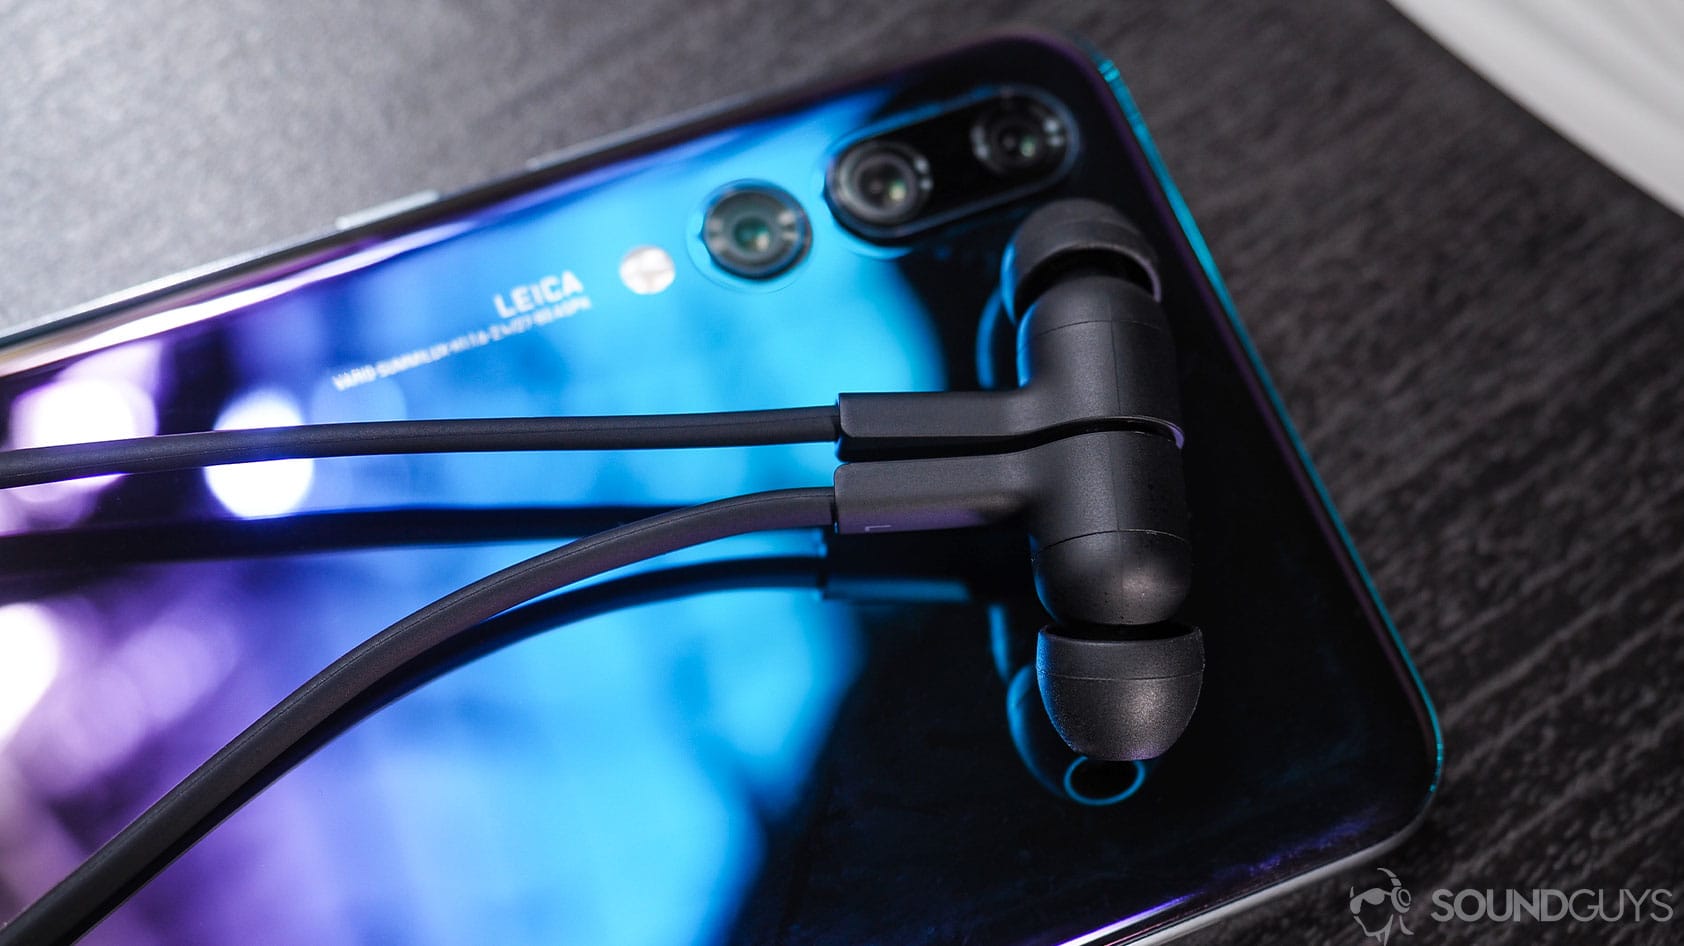 Huawei Freelace: close-up of earbuds magnetized together atop Huawei P20 smartphone.